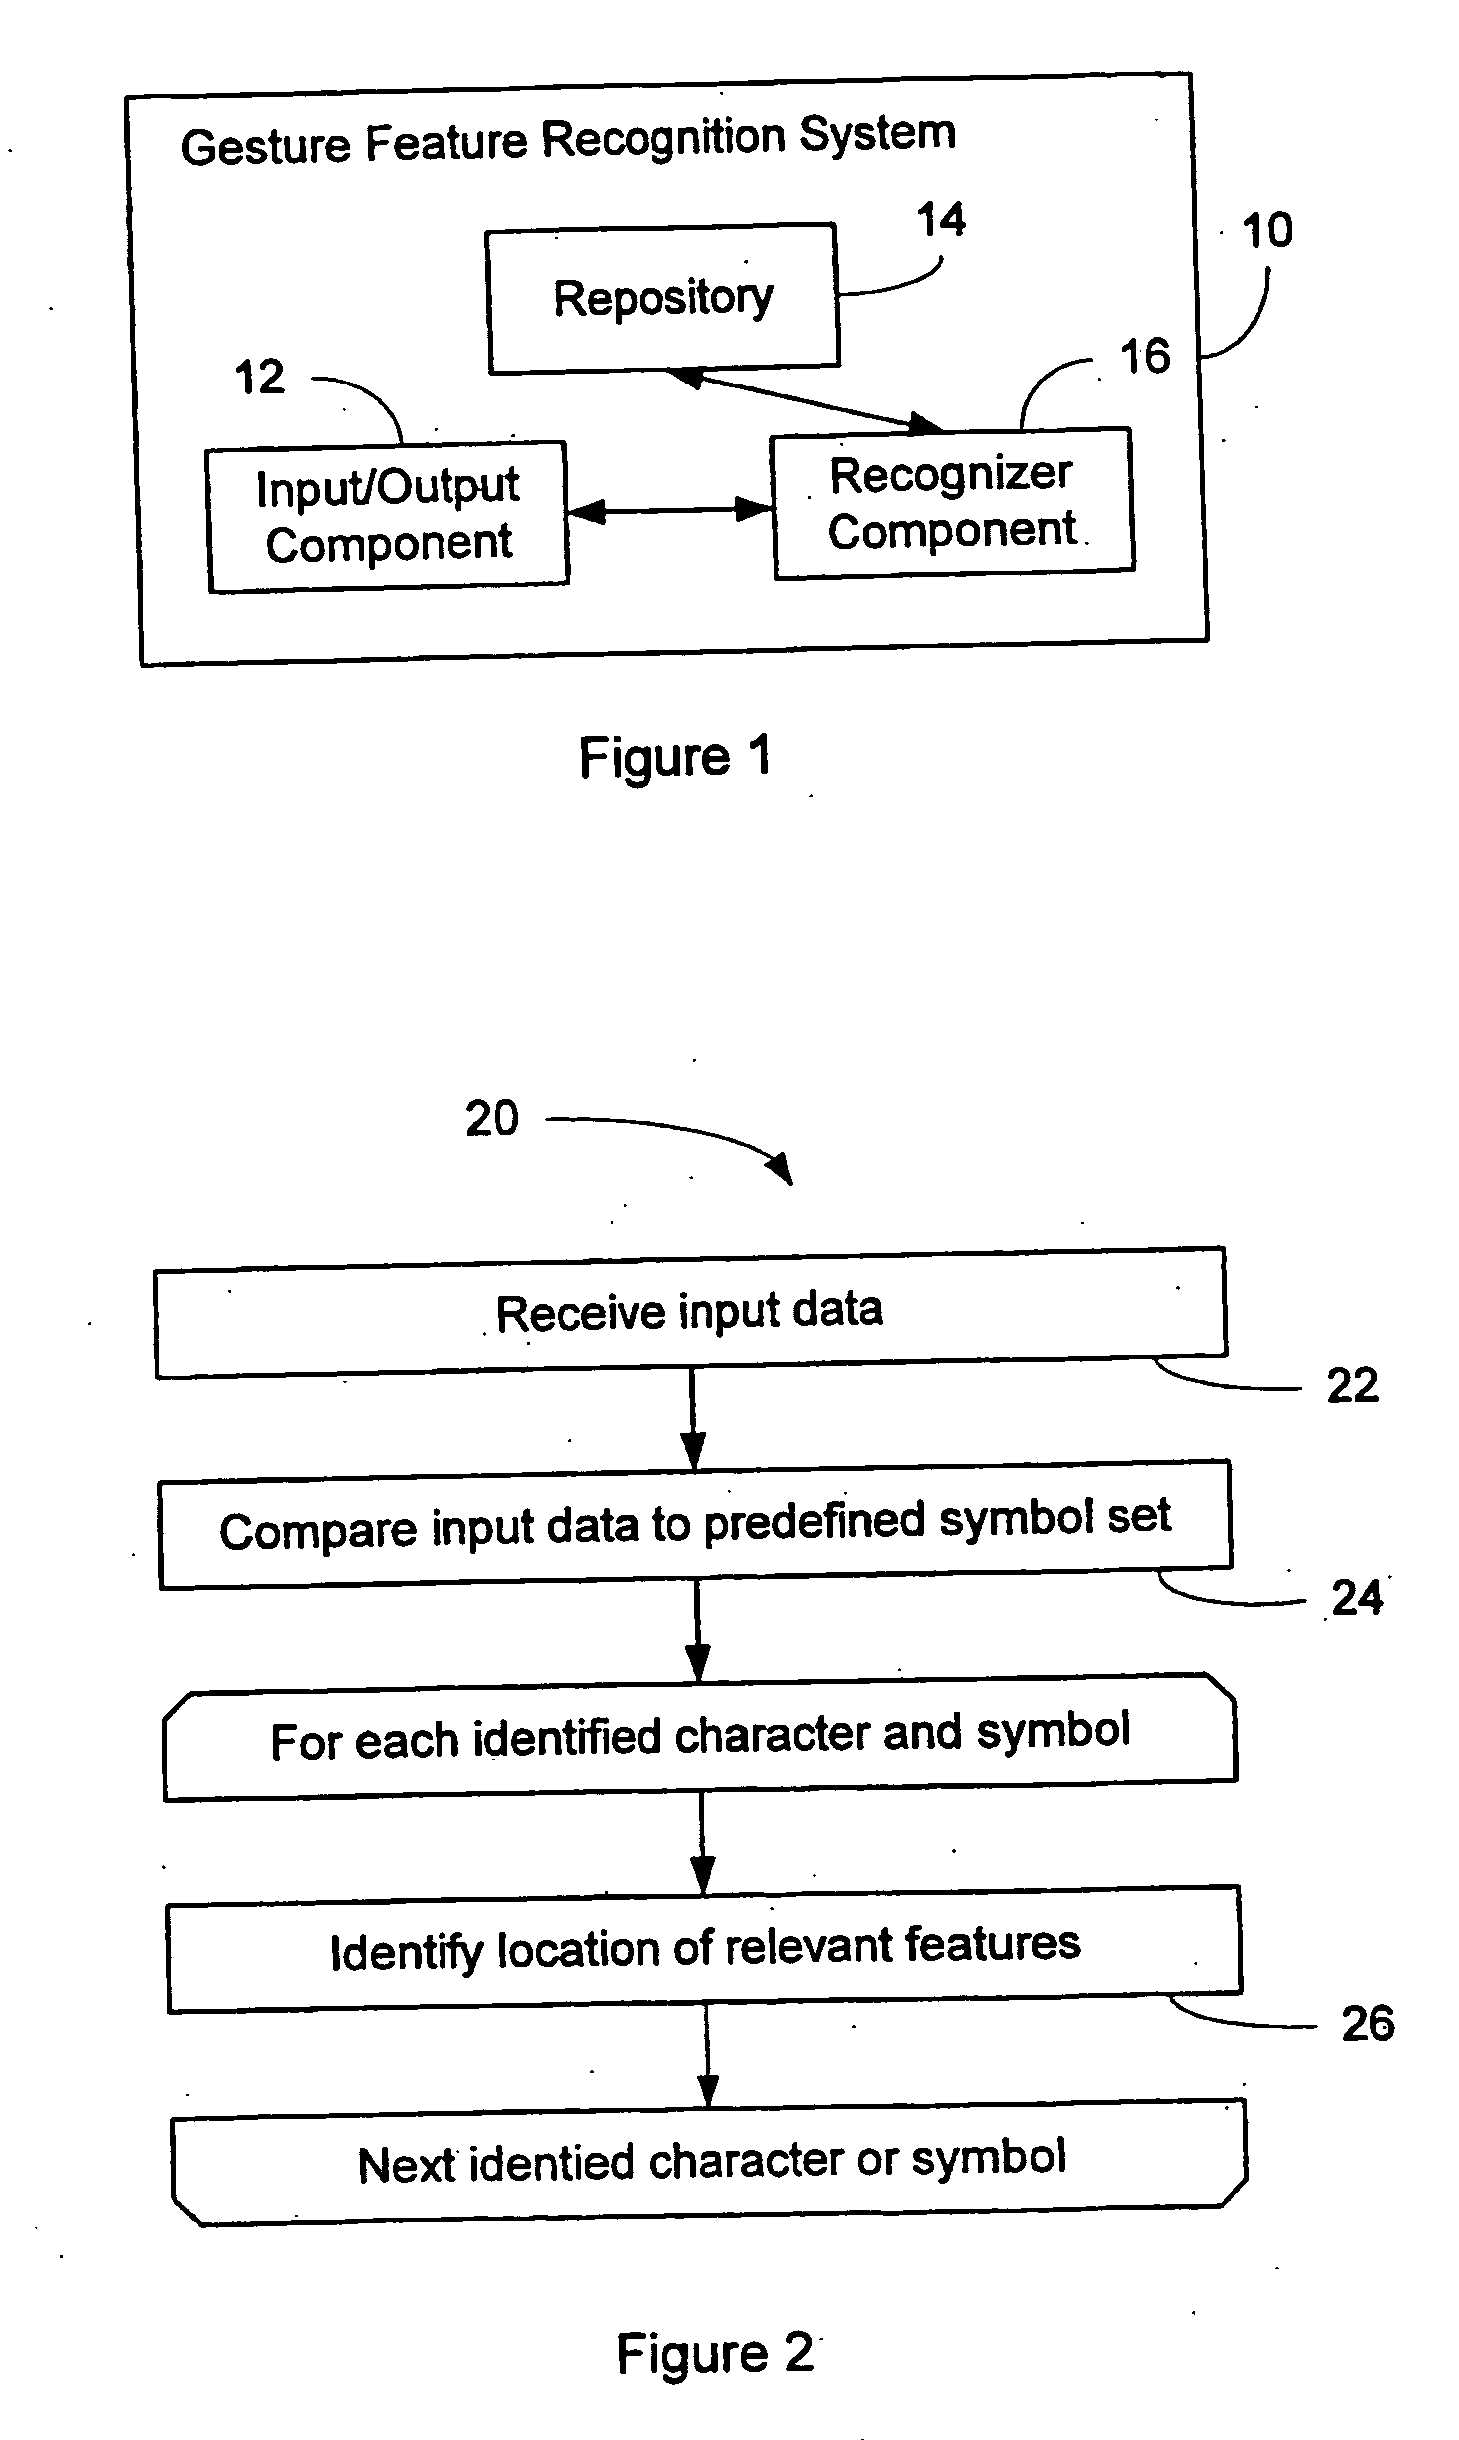 System and method of gesture feature recognition